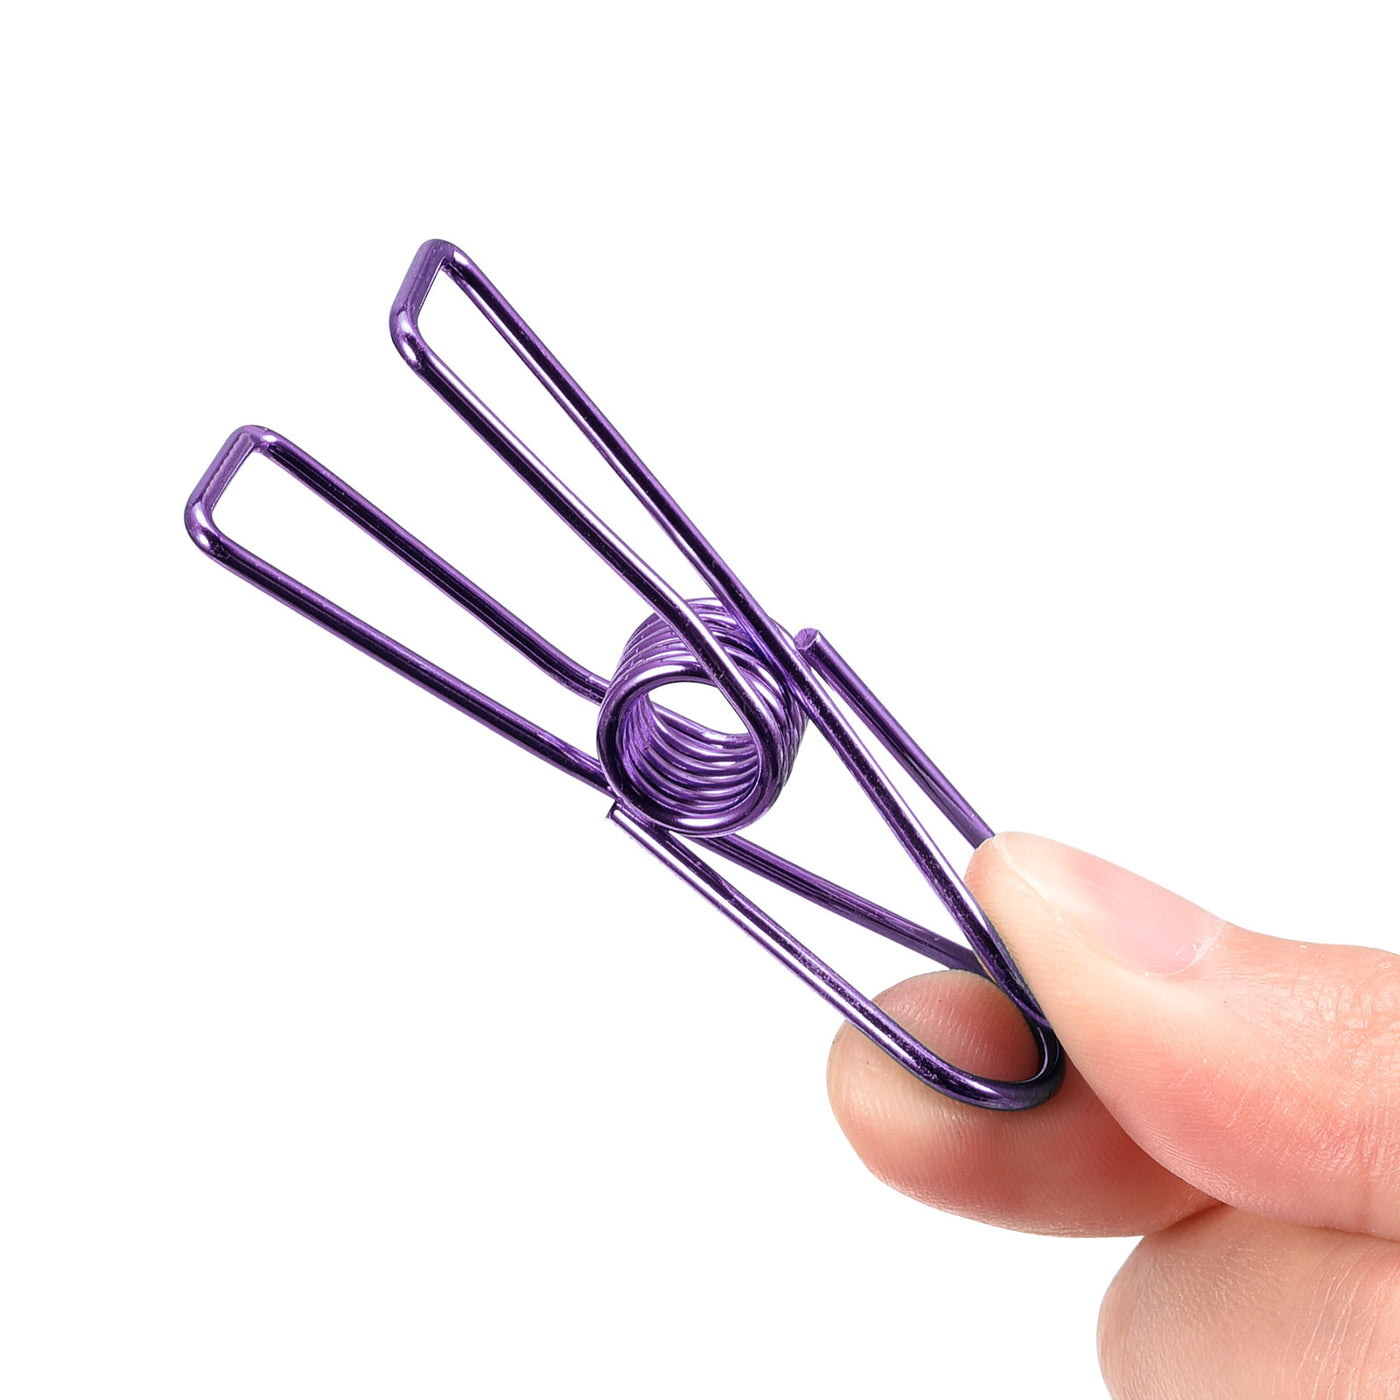 uxcell Uxcell Tablecloth Clips, 55mm Carbon Steel Clamps for Fix Table Cloth, Purple 16 Pcs